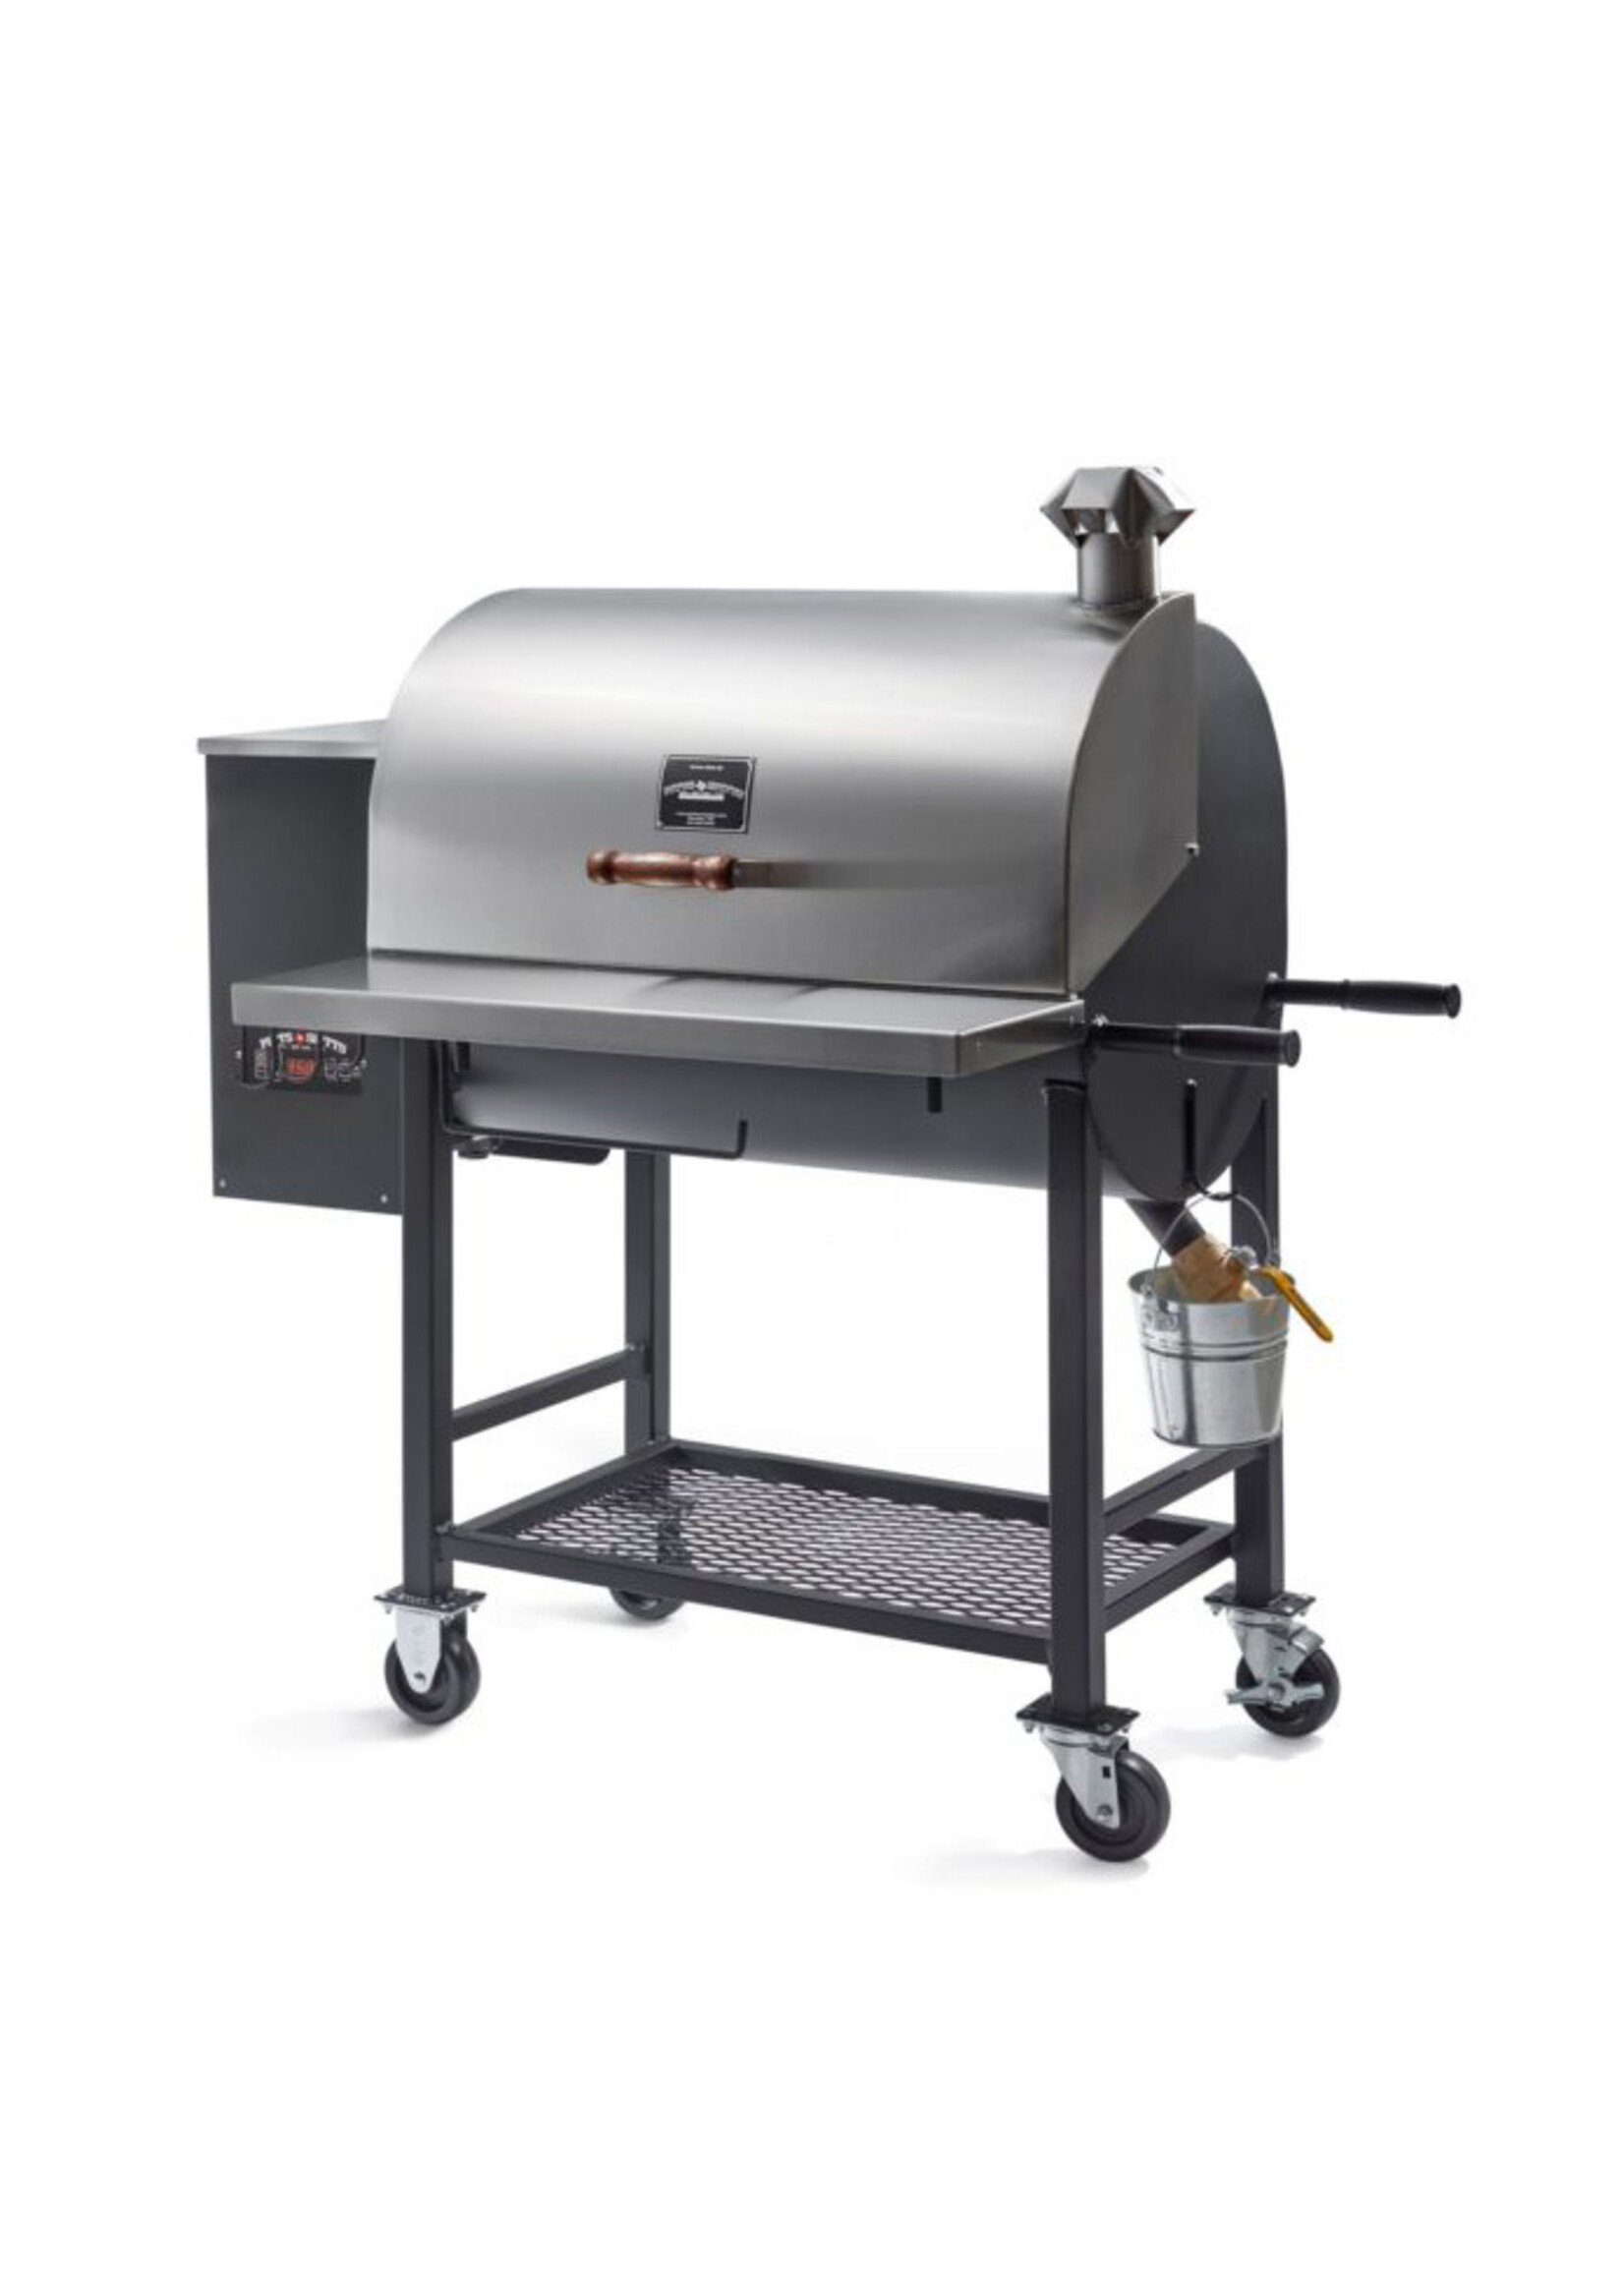 Pitts & Spitts Pitts & Spitts Maverick 850 Pellet Grill w/ 8" Casters